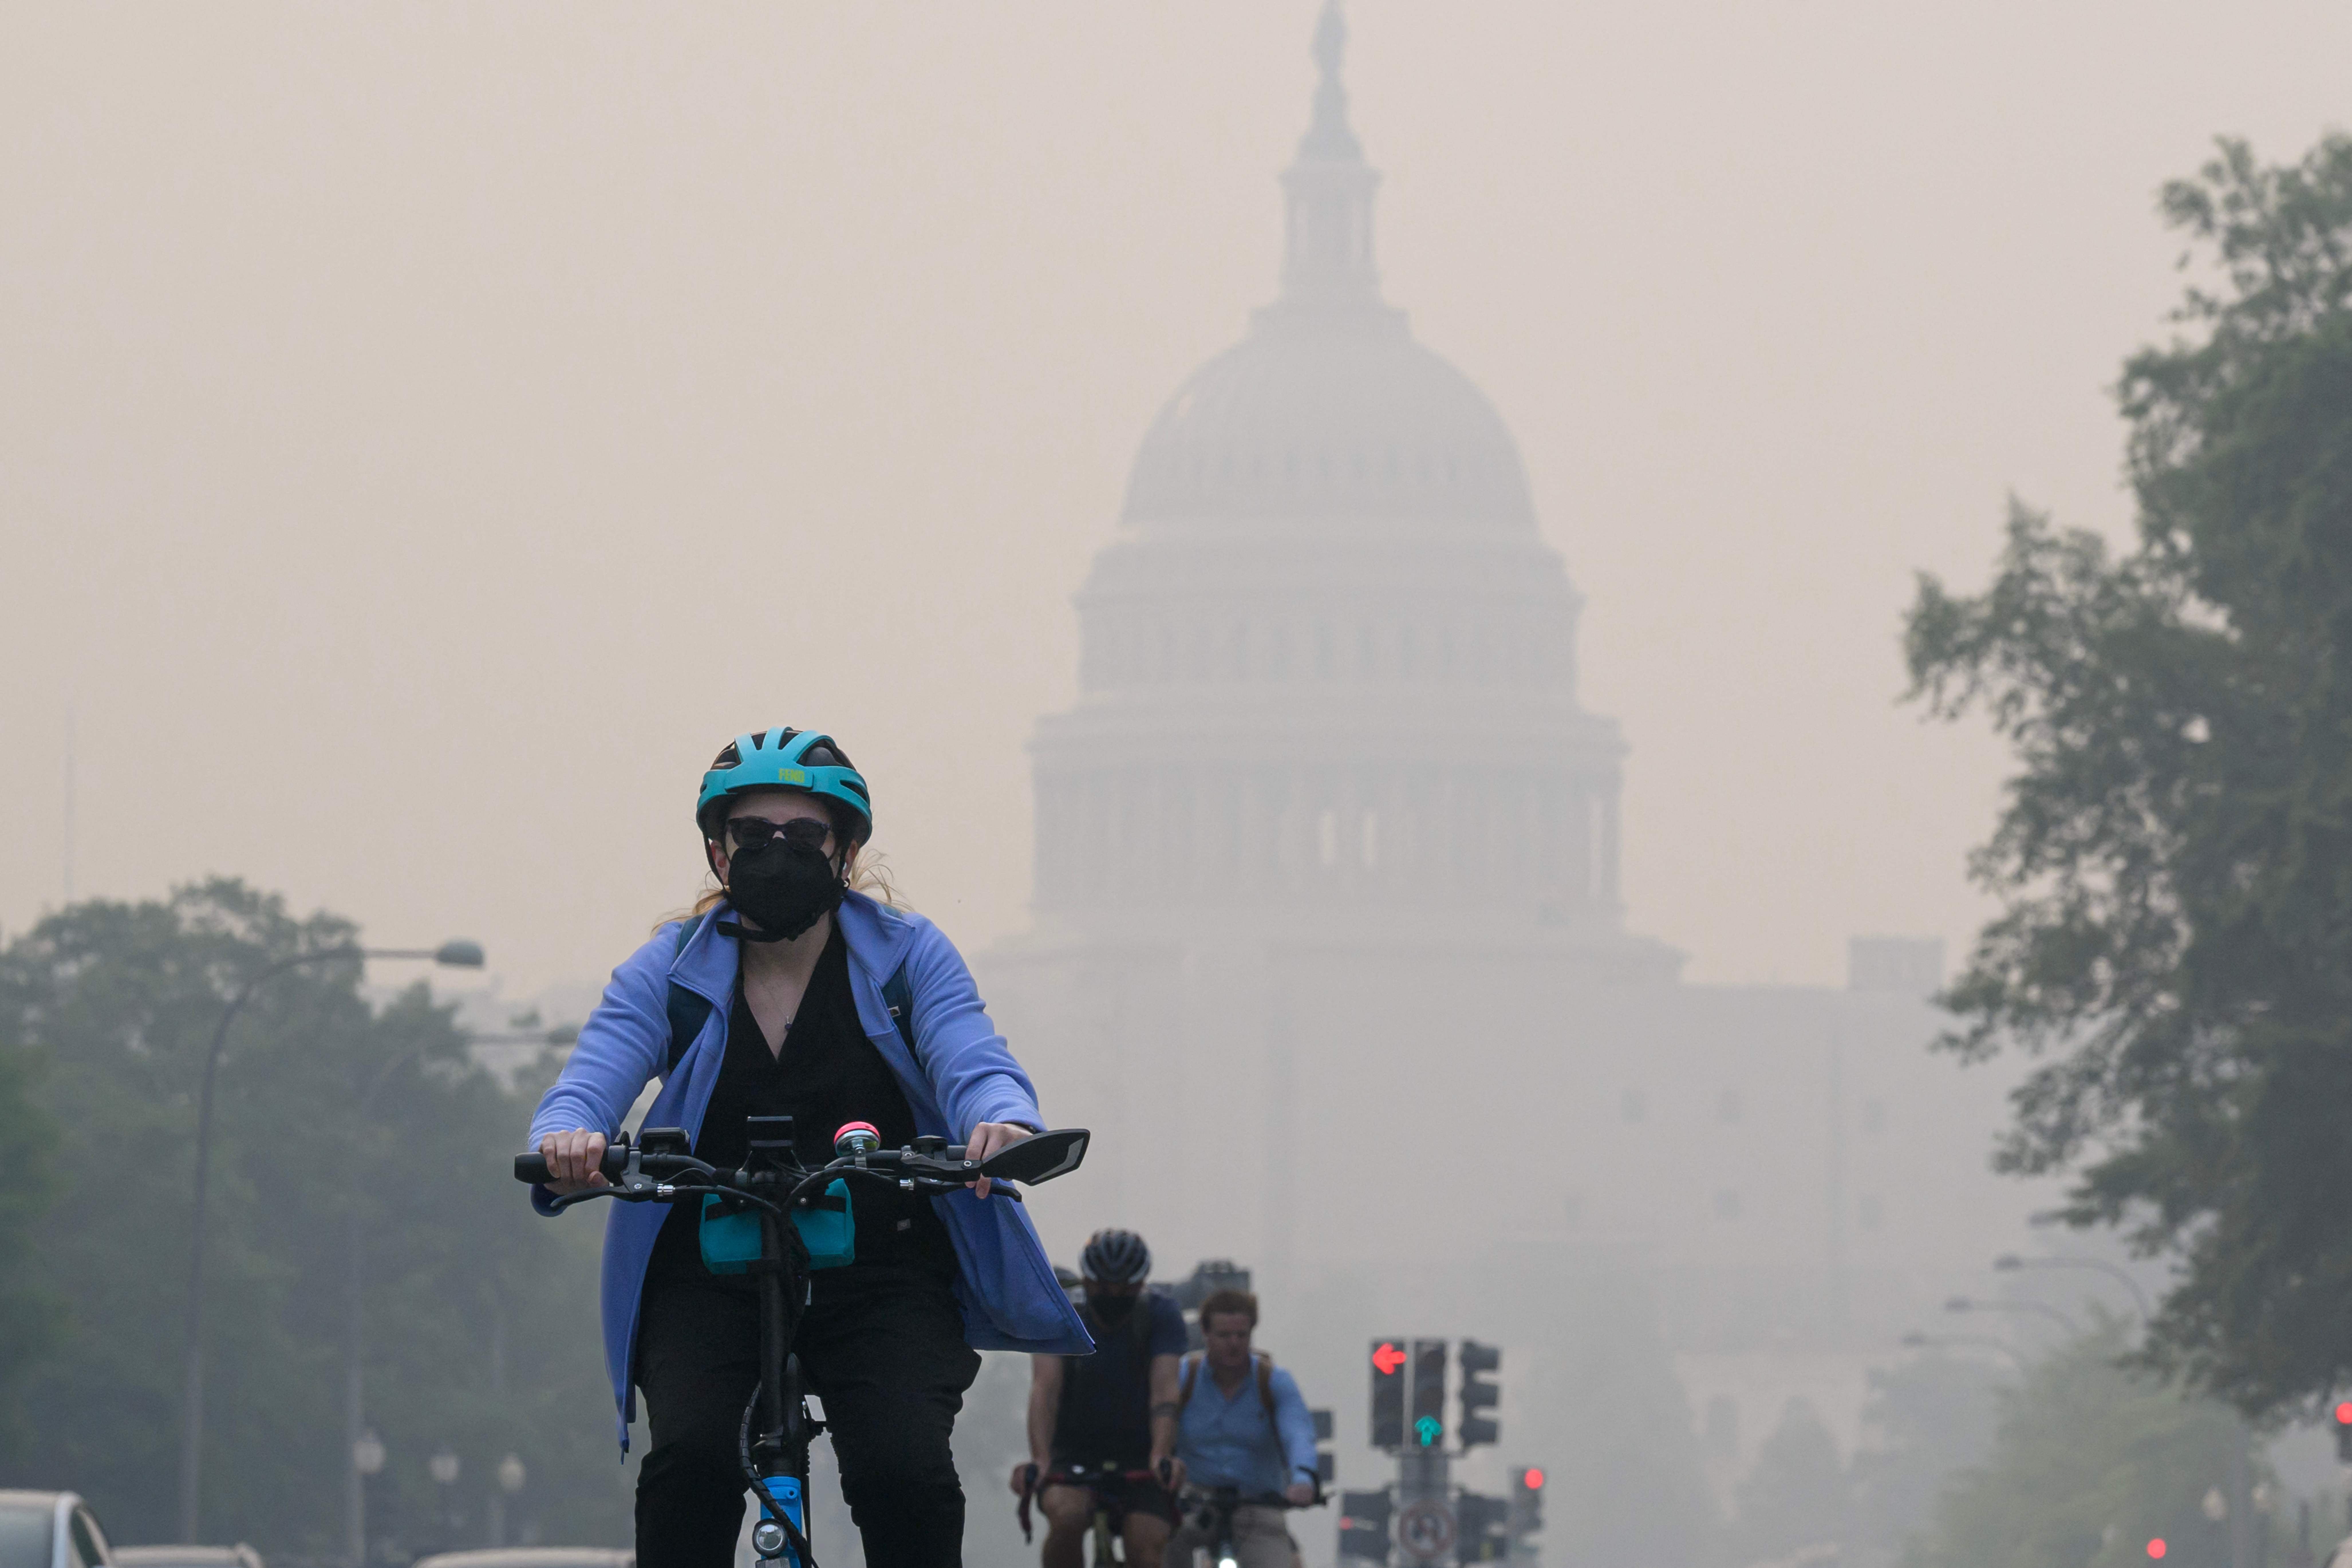 A cyclist rides under a blanket of haze partially obscuring the US Capitol in Washington, DC, on Thursday